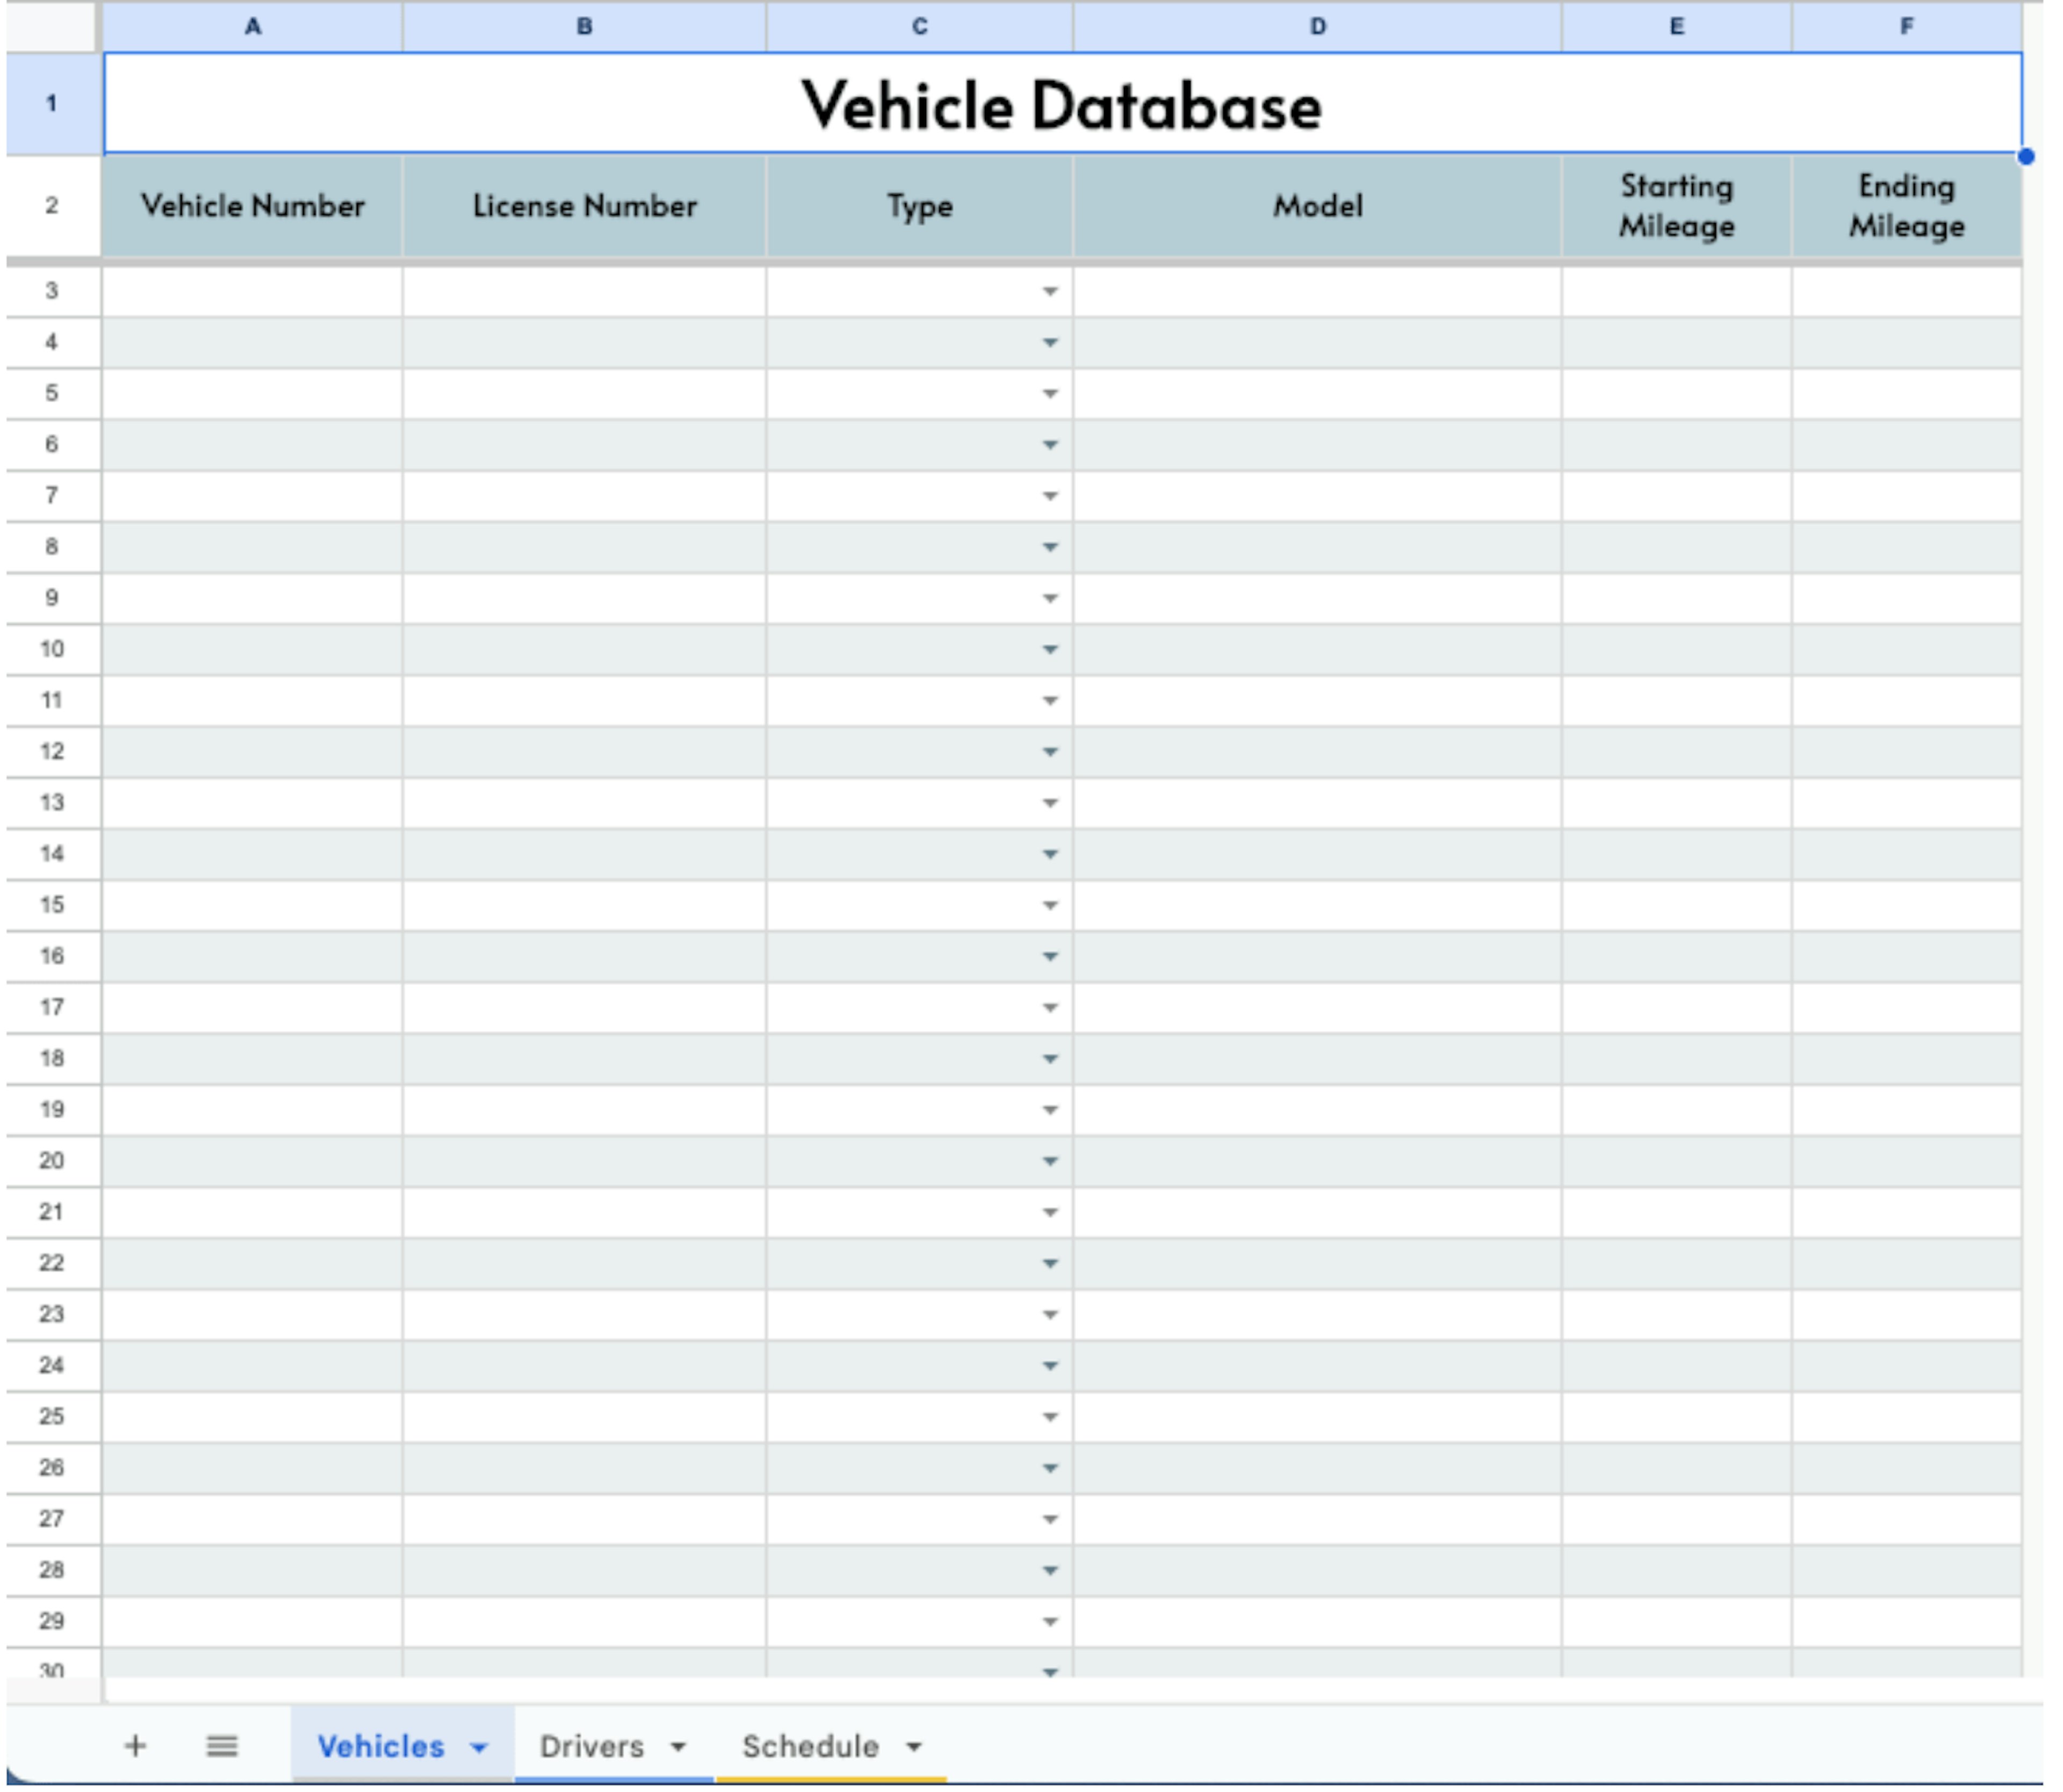 Blank vehicle database tab on a driver schedule spreadsheet, with columns for vehicle and license numbers, type, model, and mileage